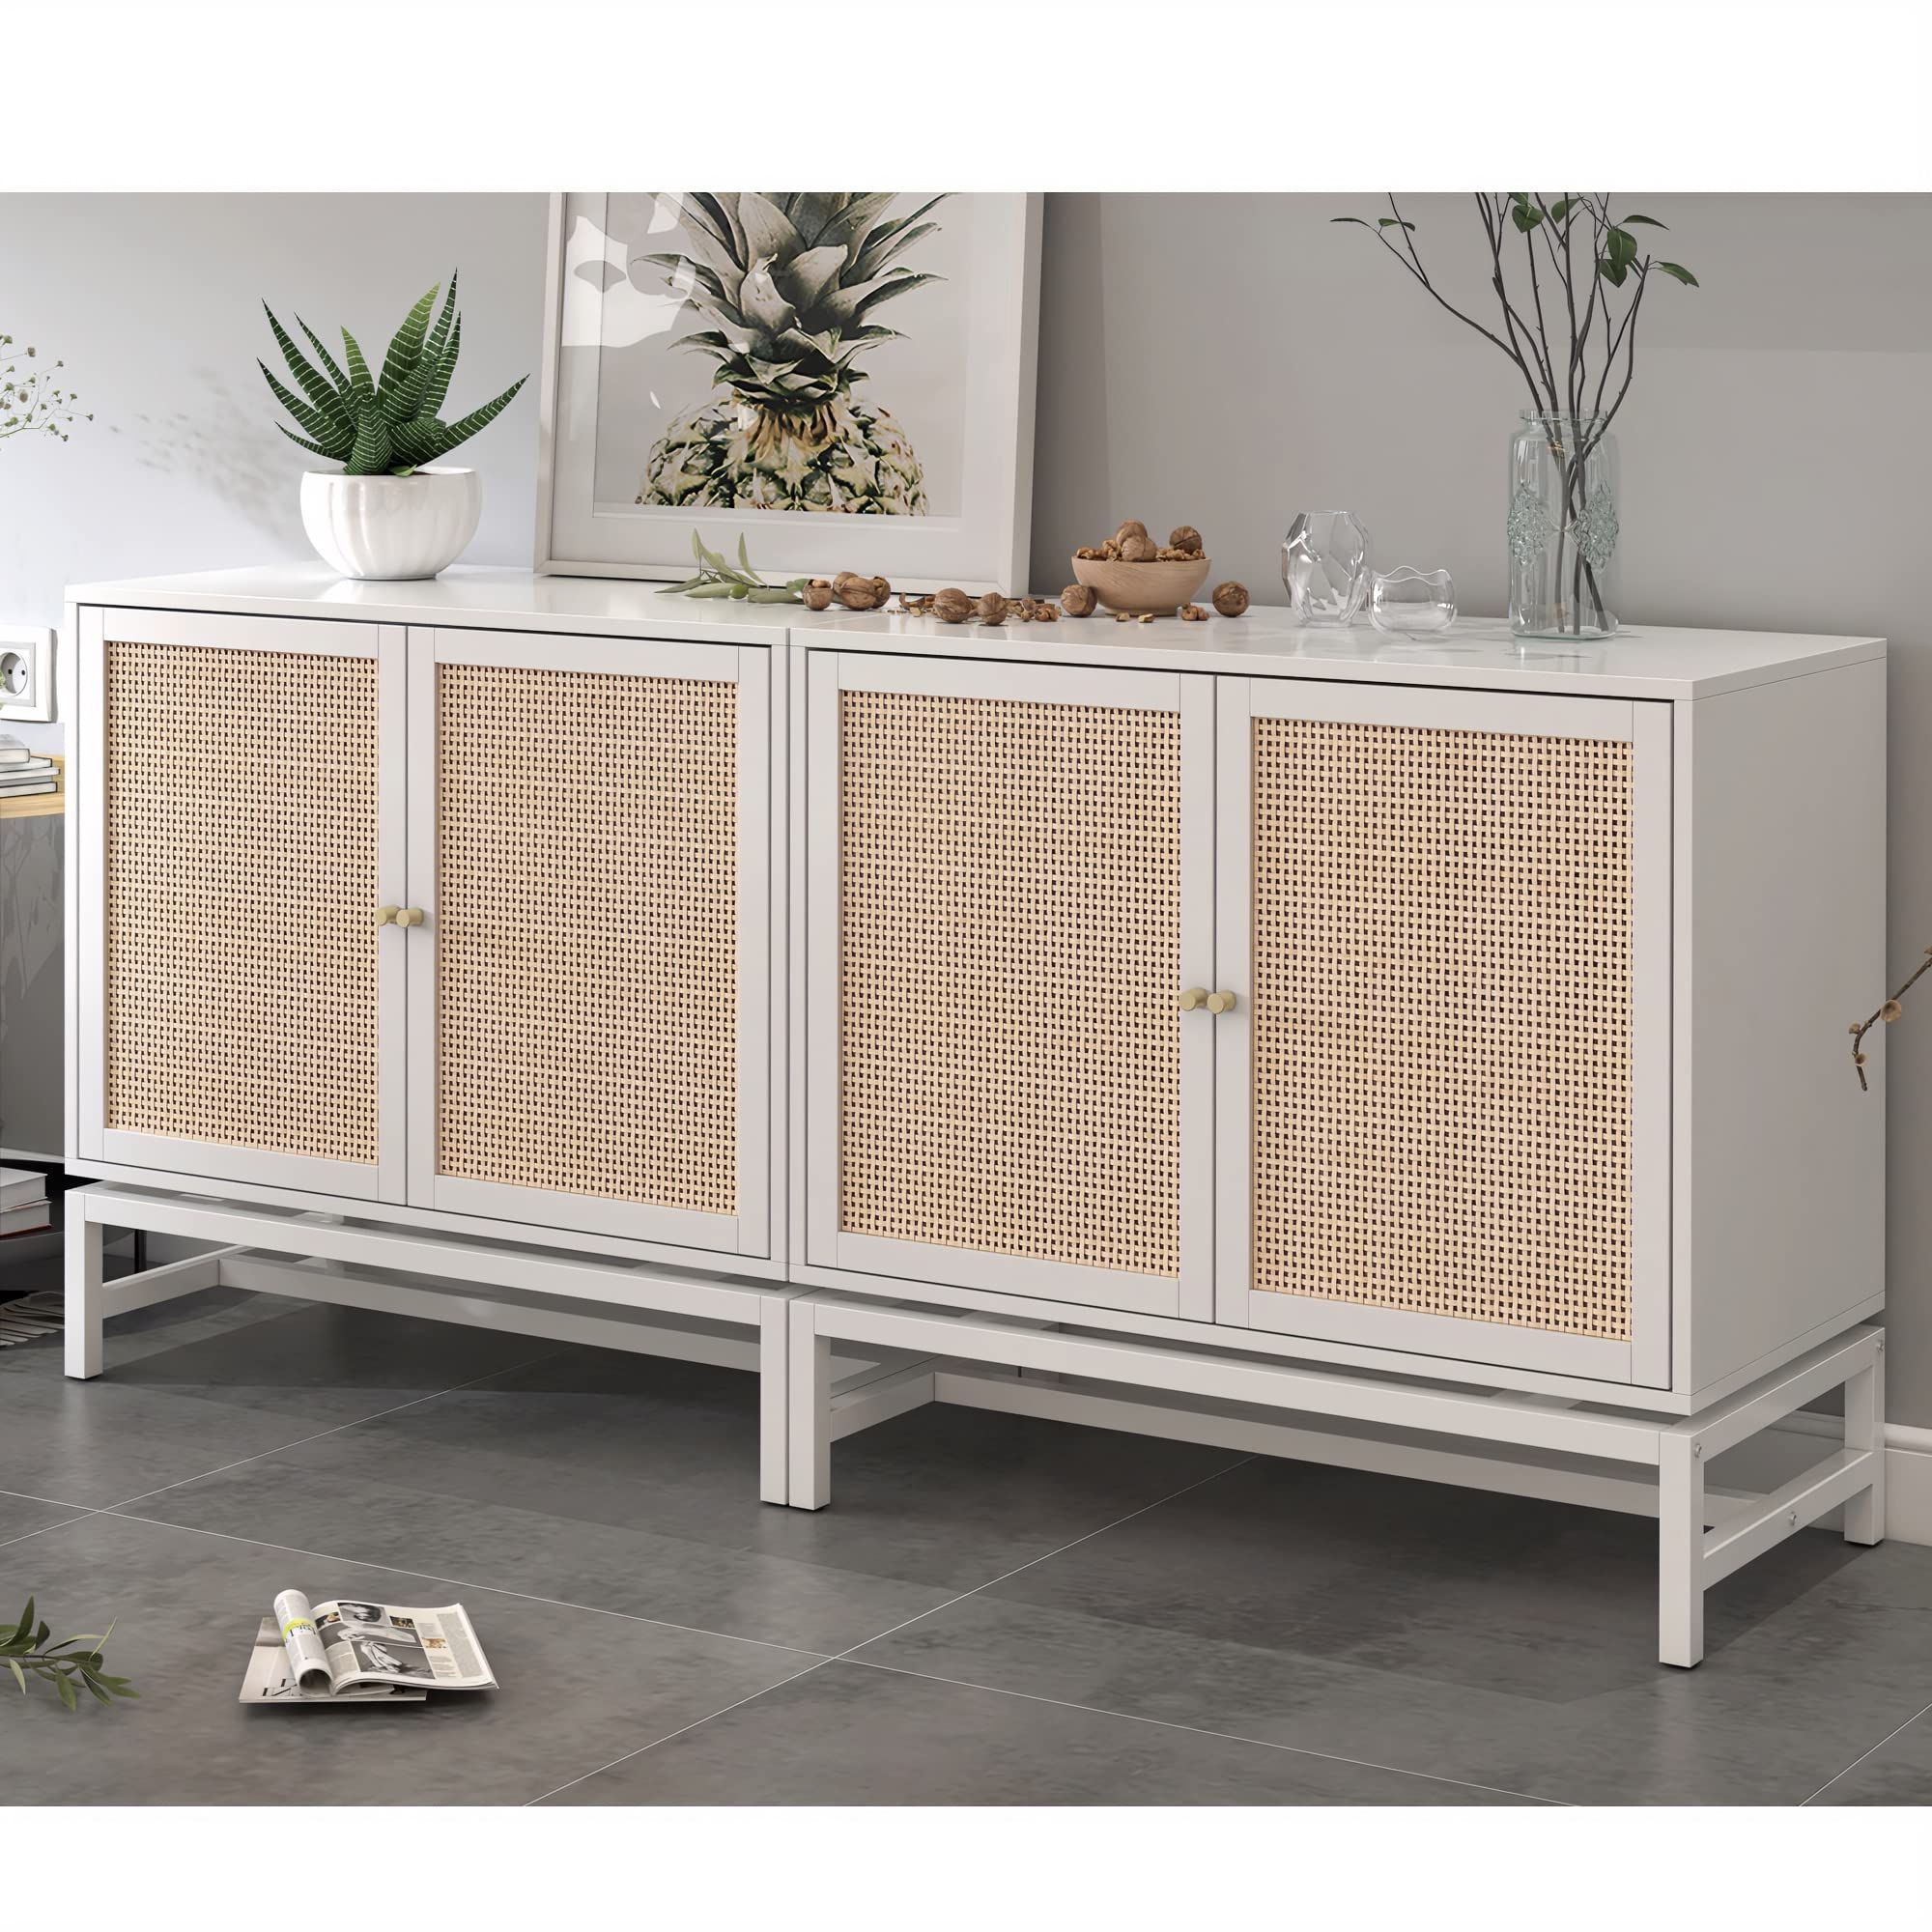 Assembled Rattan Buffet Sideboards Inside Well Known Amazon – Awqm 2pcs Rattan Sideboard Buffet Cabinet With  Storage,kithchen Accent Storage Cabinet With Doors Console Table With  Adjustable Shelves,wood Console Cabinet For Dining Room,living Room,white –  Buffets & Sideboards (Photo 6 of 10)